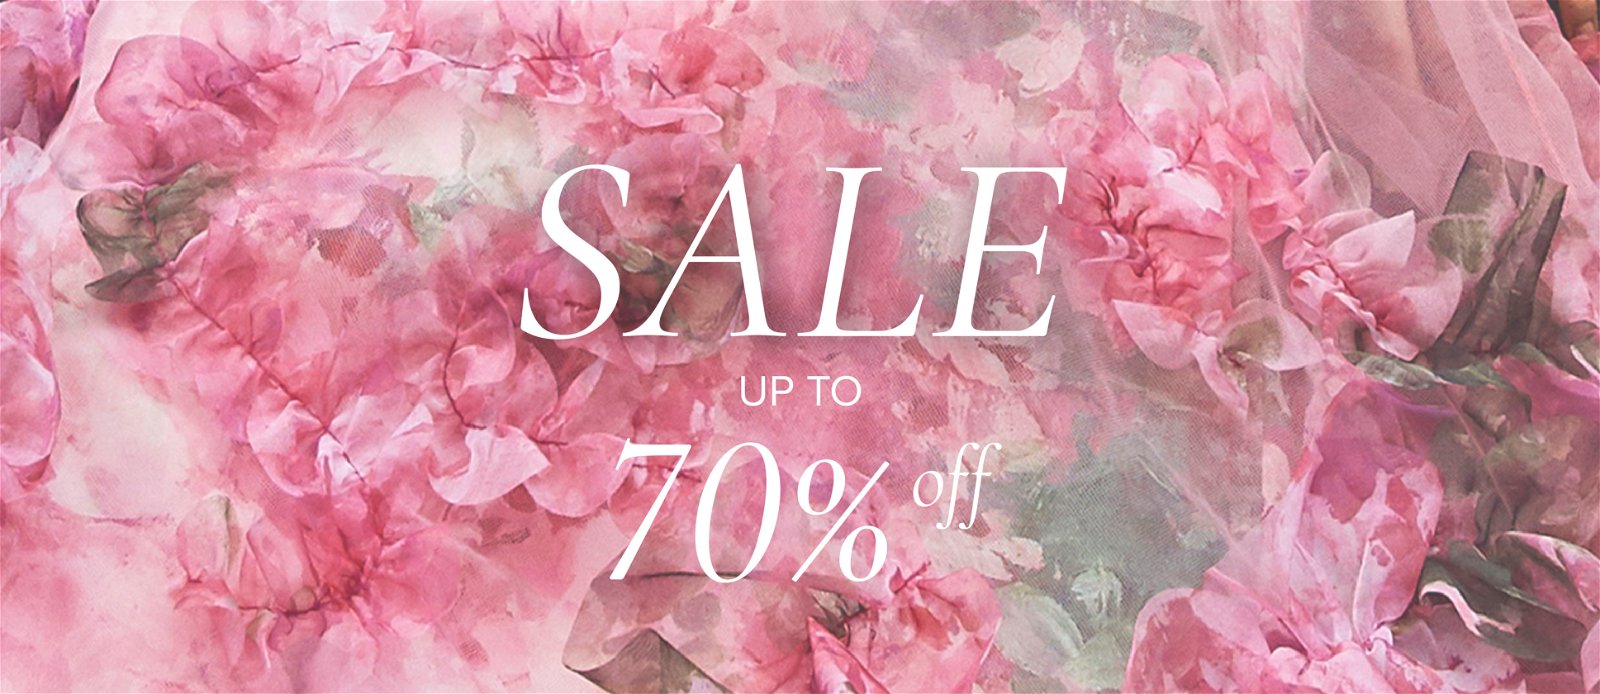 SALE UP TO 70%